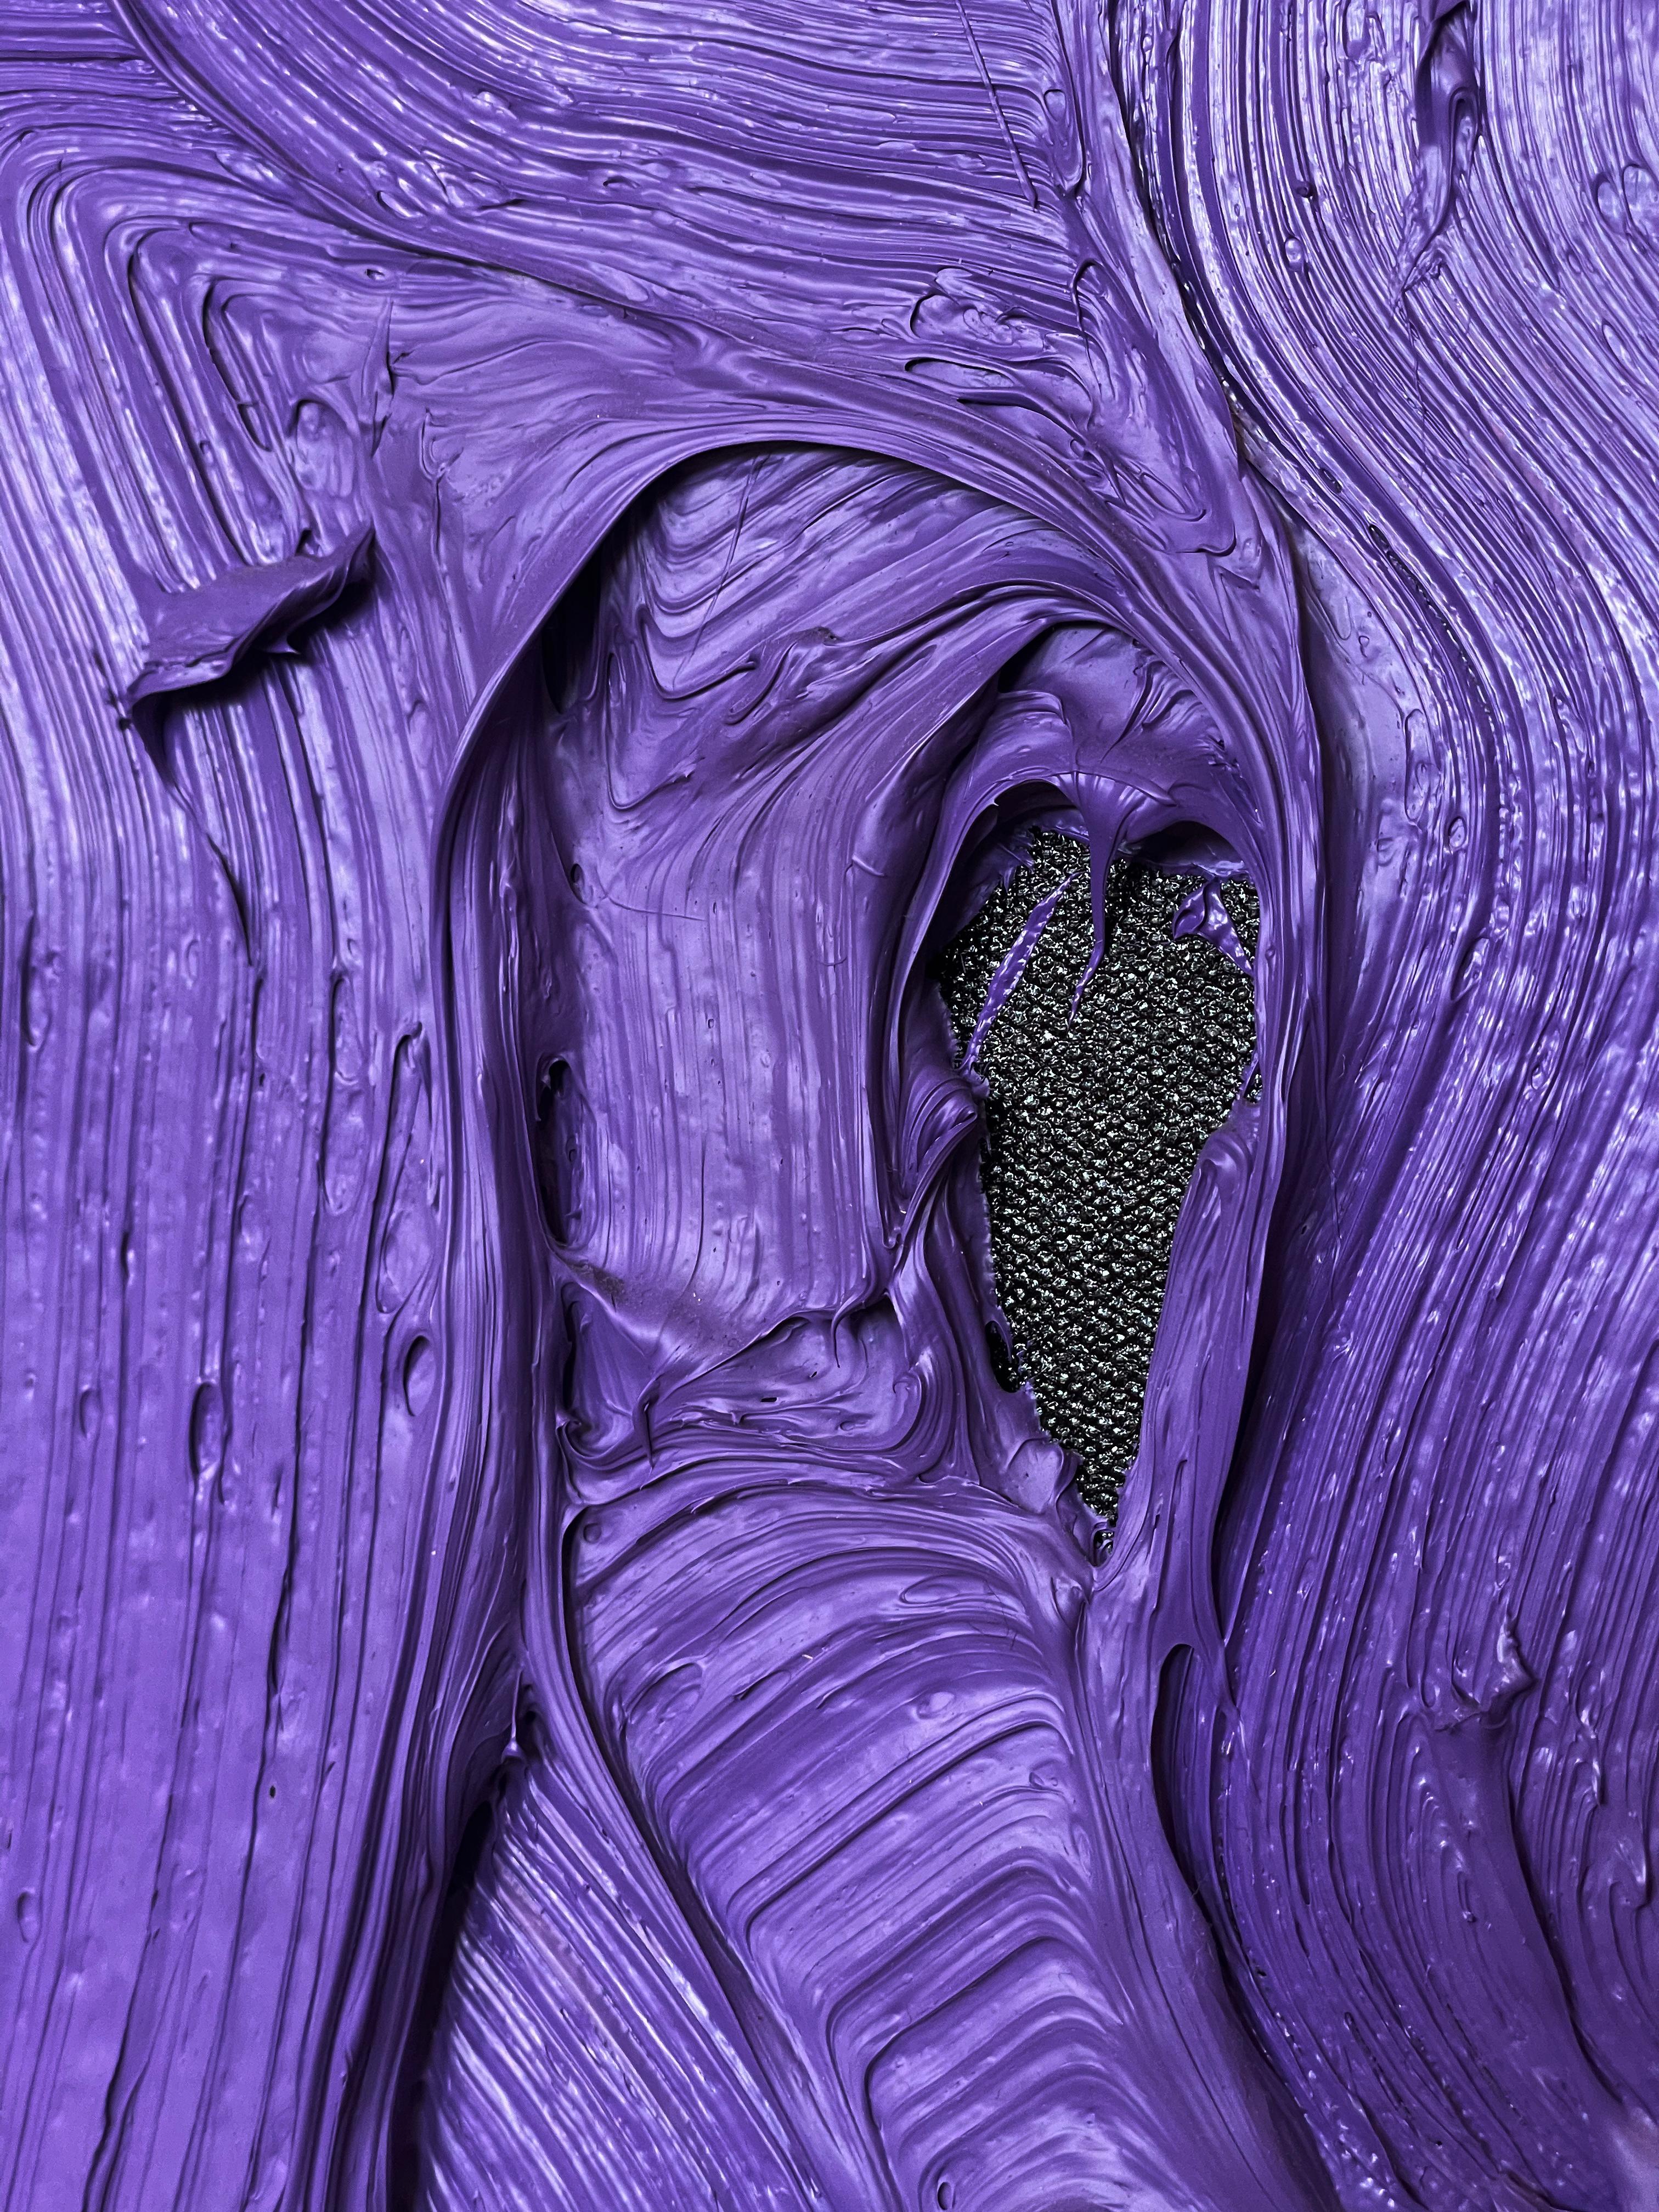 Hysterical Phantasy, purple black abstract - Abstract Painting by John Zinsser